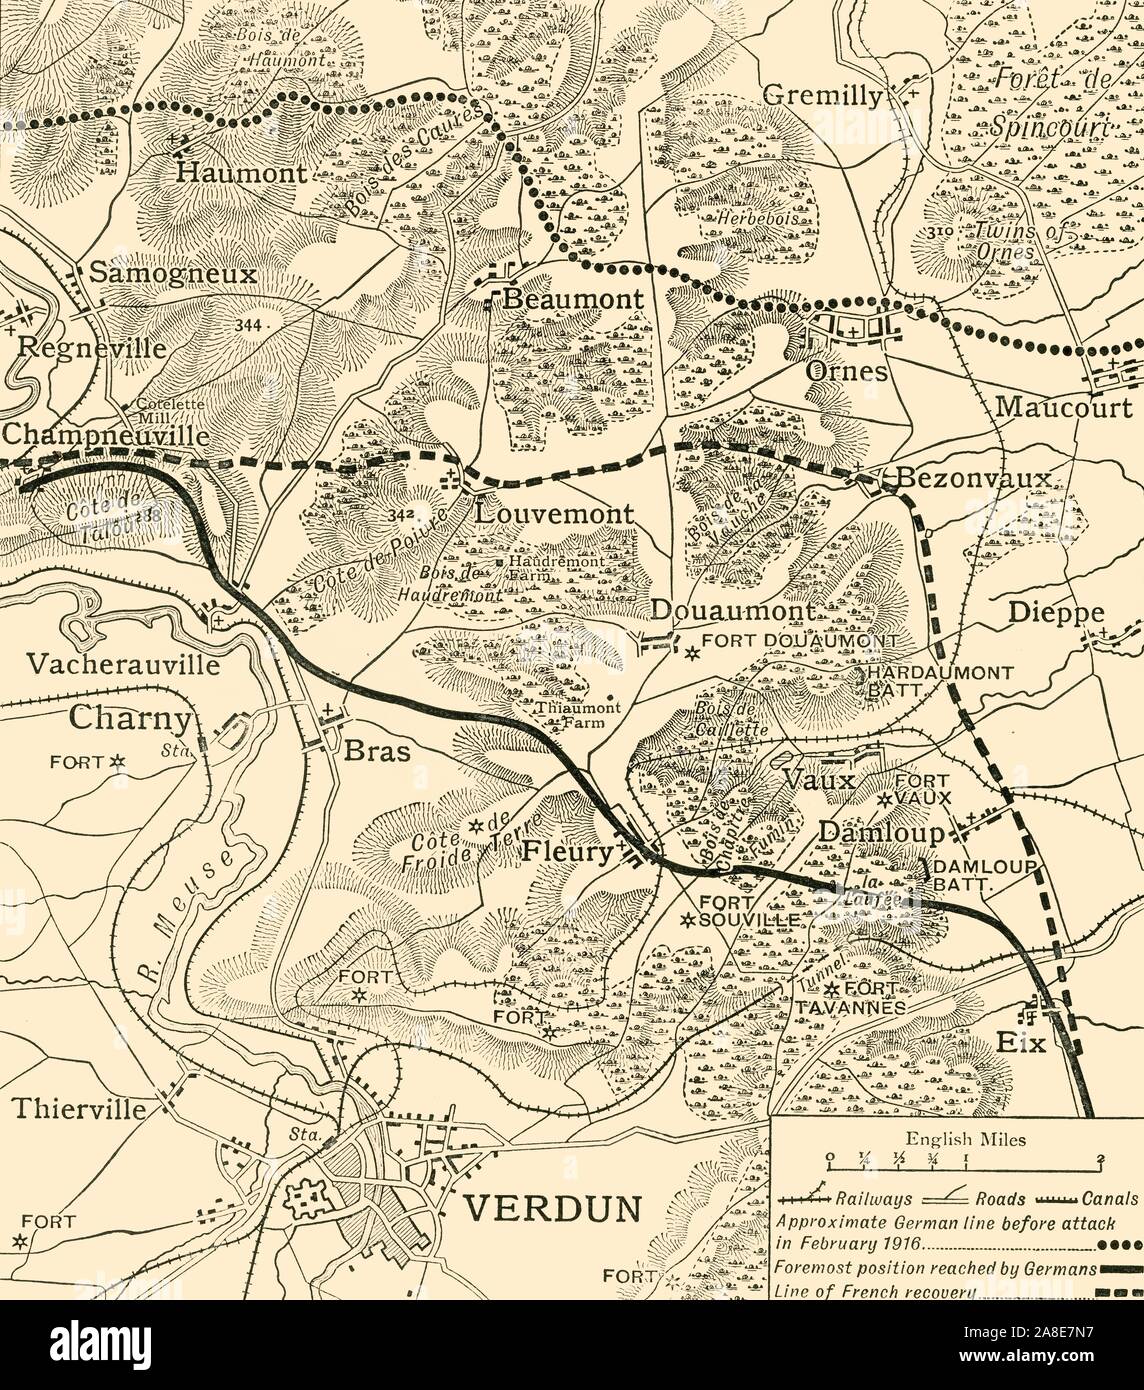 'The Mort Homme Area and the Defences on the West Side of the Meuse', 1916, (c1920). 'The Battles of Verdun, 1916; map...showing approximately the limits of the German advance and the region recaptured by the French by the end of the year'. Theatre of war on the Western Front, northern France, First World War. From &quot;The Great World War: A History&quot;, Volume VI, edited by Frank A Mumby. [The Gresham Publishing Company Ltd, London, c1920] Stock Photo